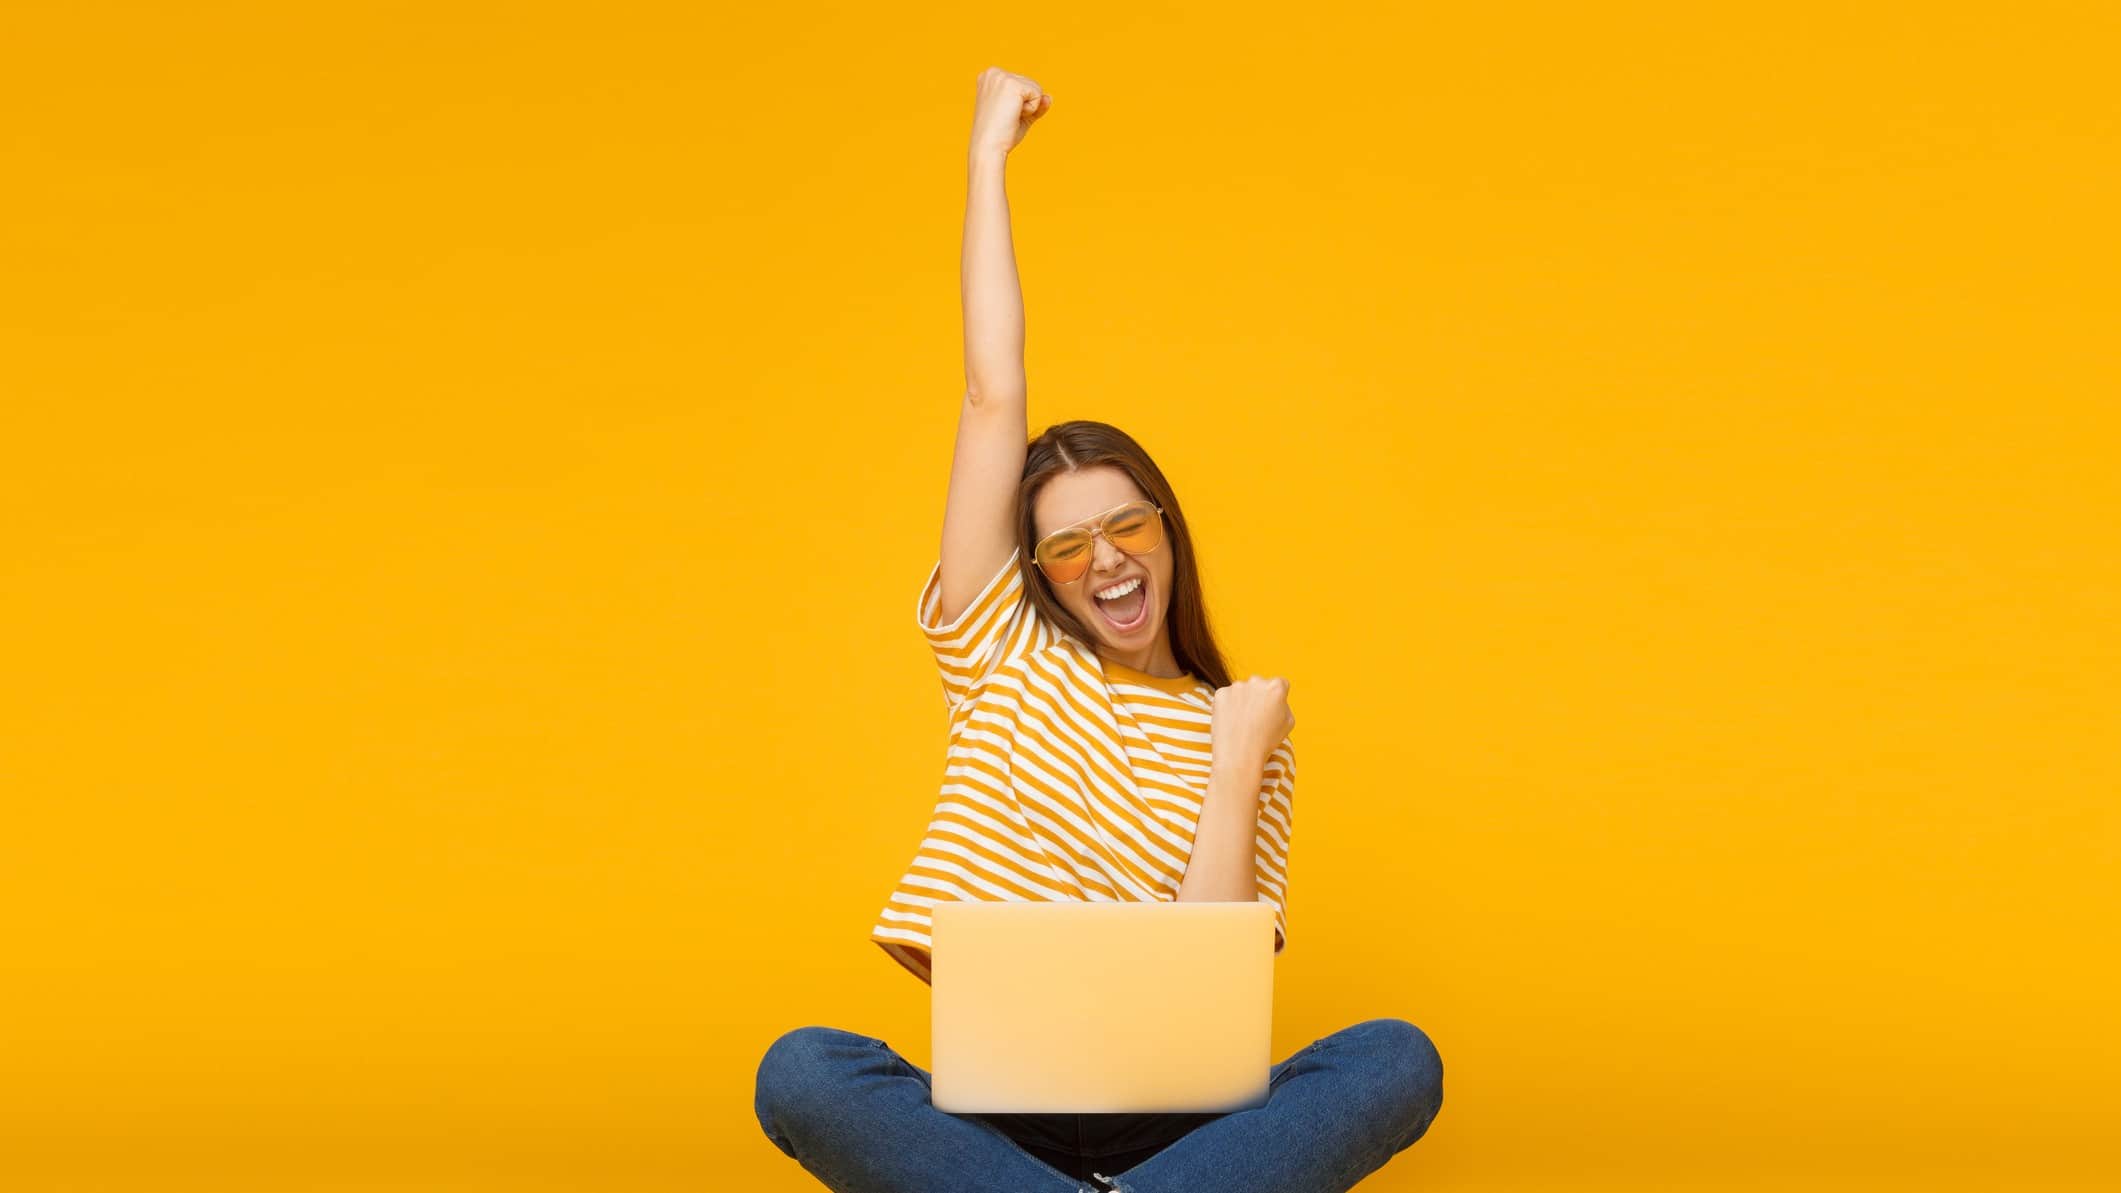 Young woman in yellow striped top with laptop raises arm in victory